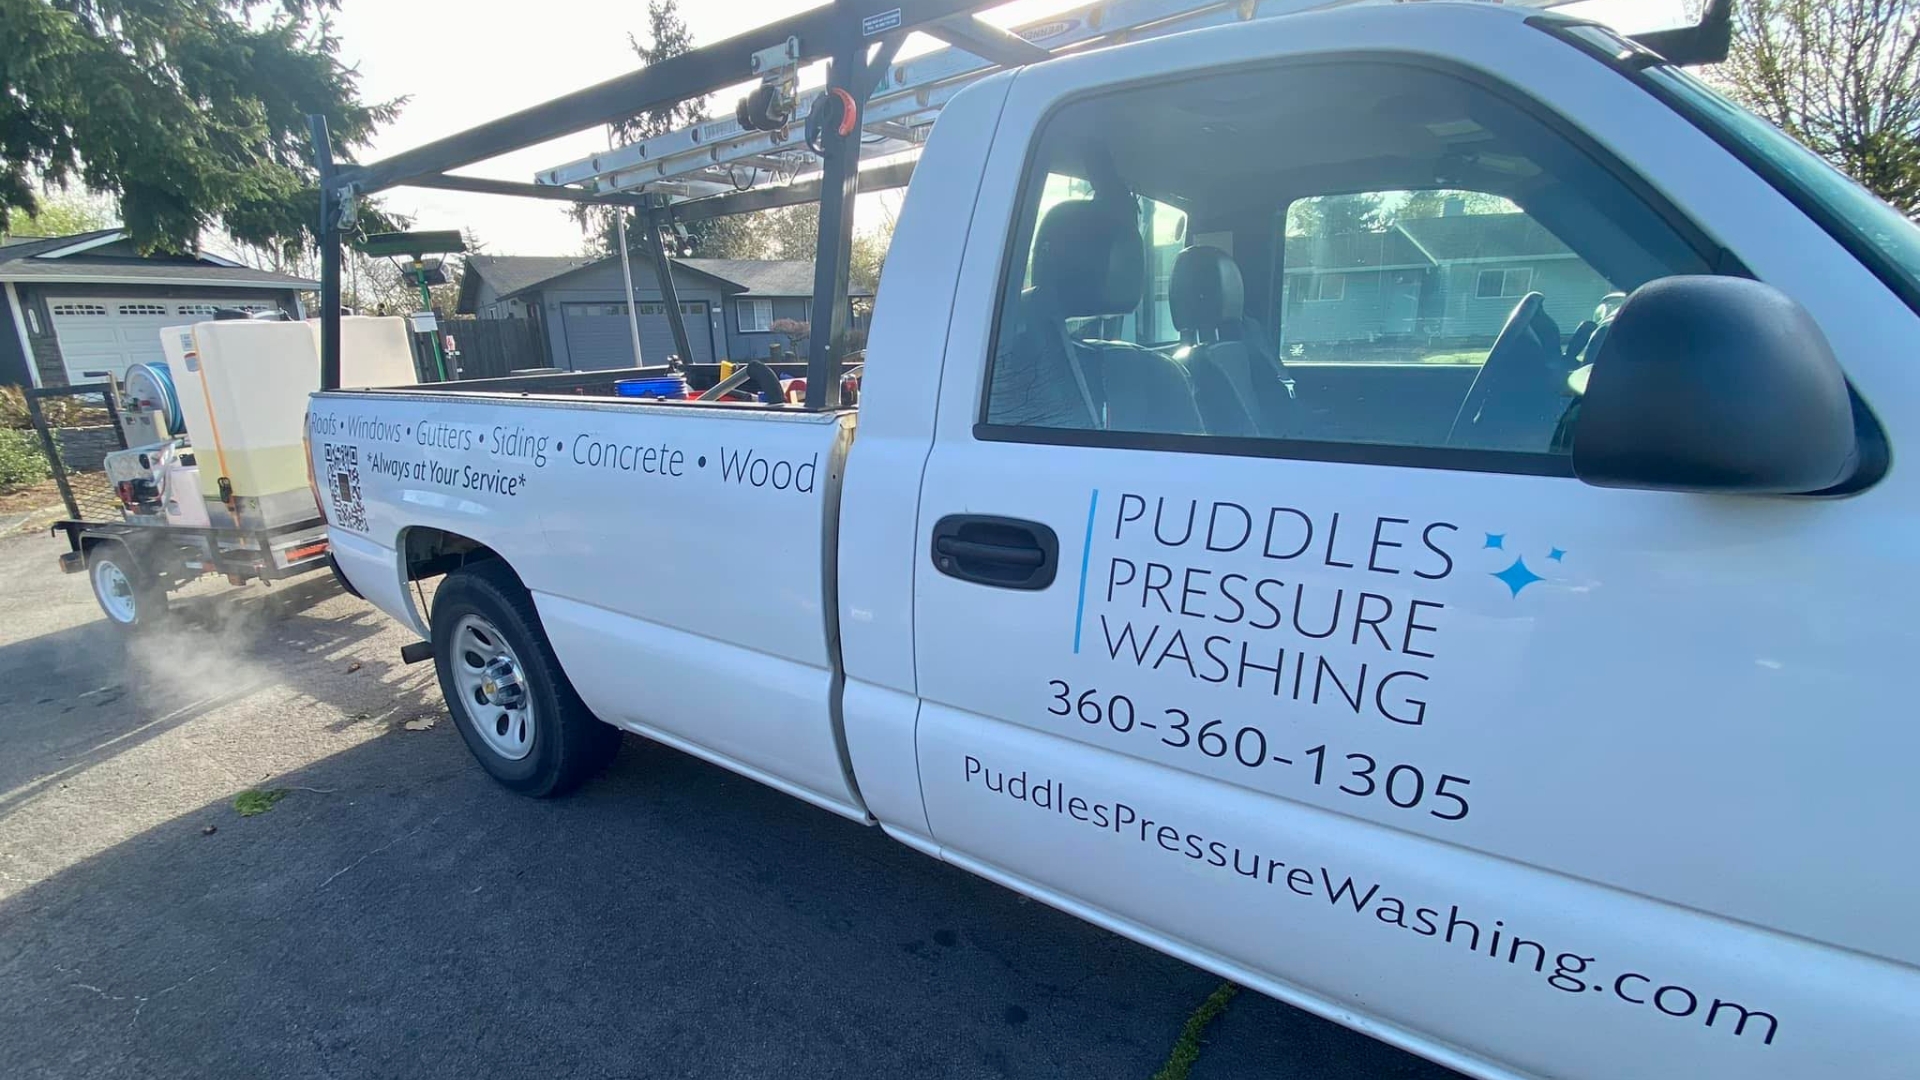 Puddles Pressure Washing, Always At Your Service